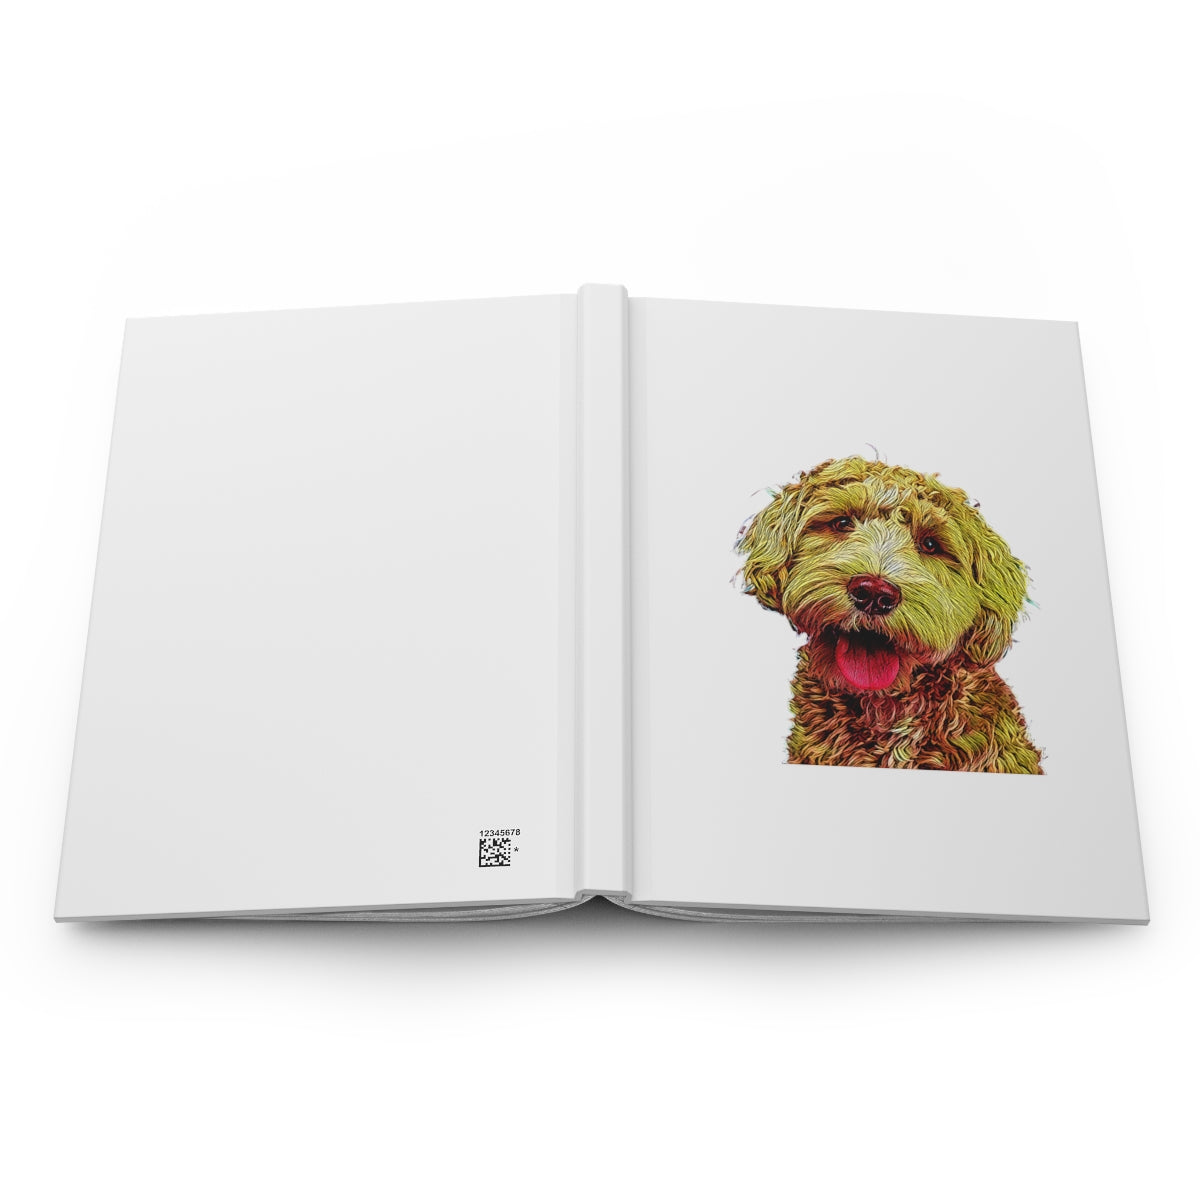 Hard cover notebook, Dotted Paper Journal, Cute Dog Journal, Dog, Lined Notebook, Lined Journal, Stationary, Empowerment Joural - The Good Life Vibe